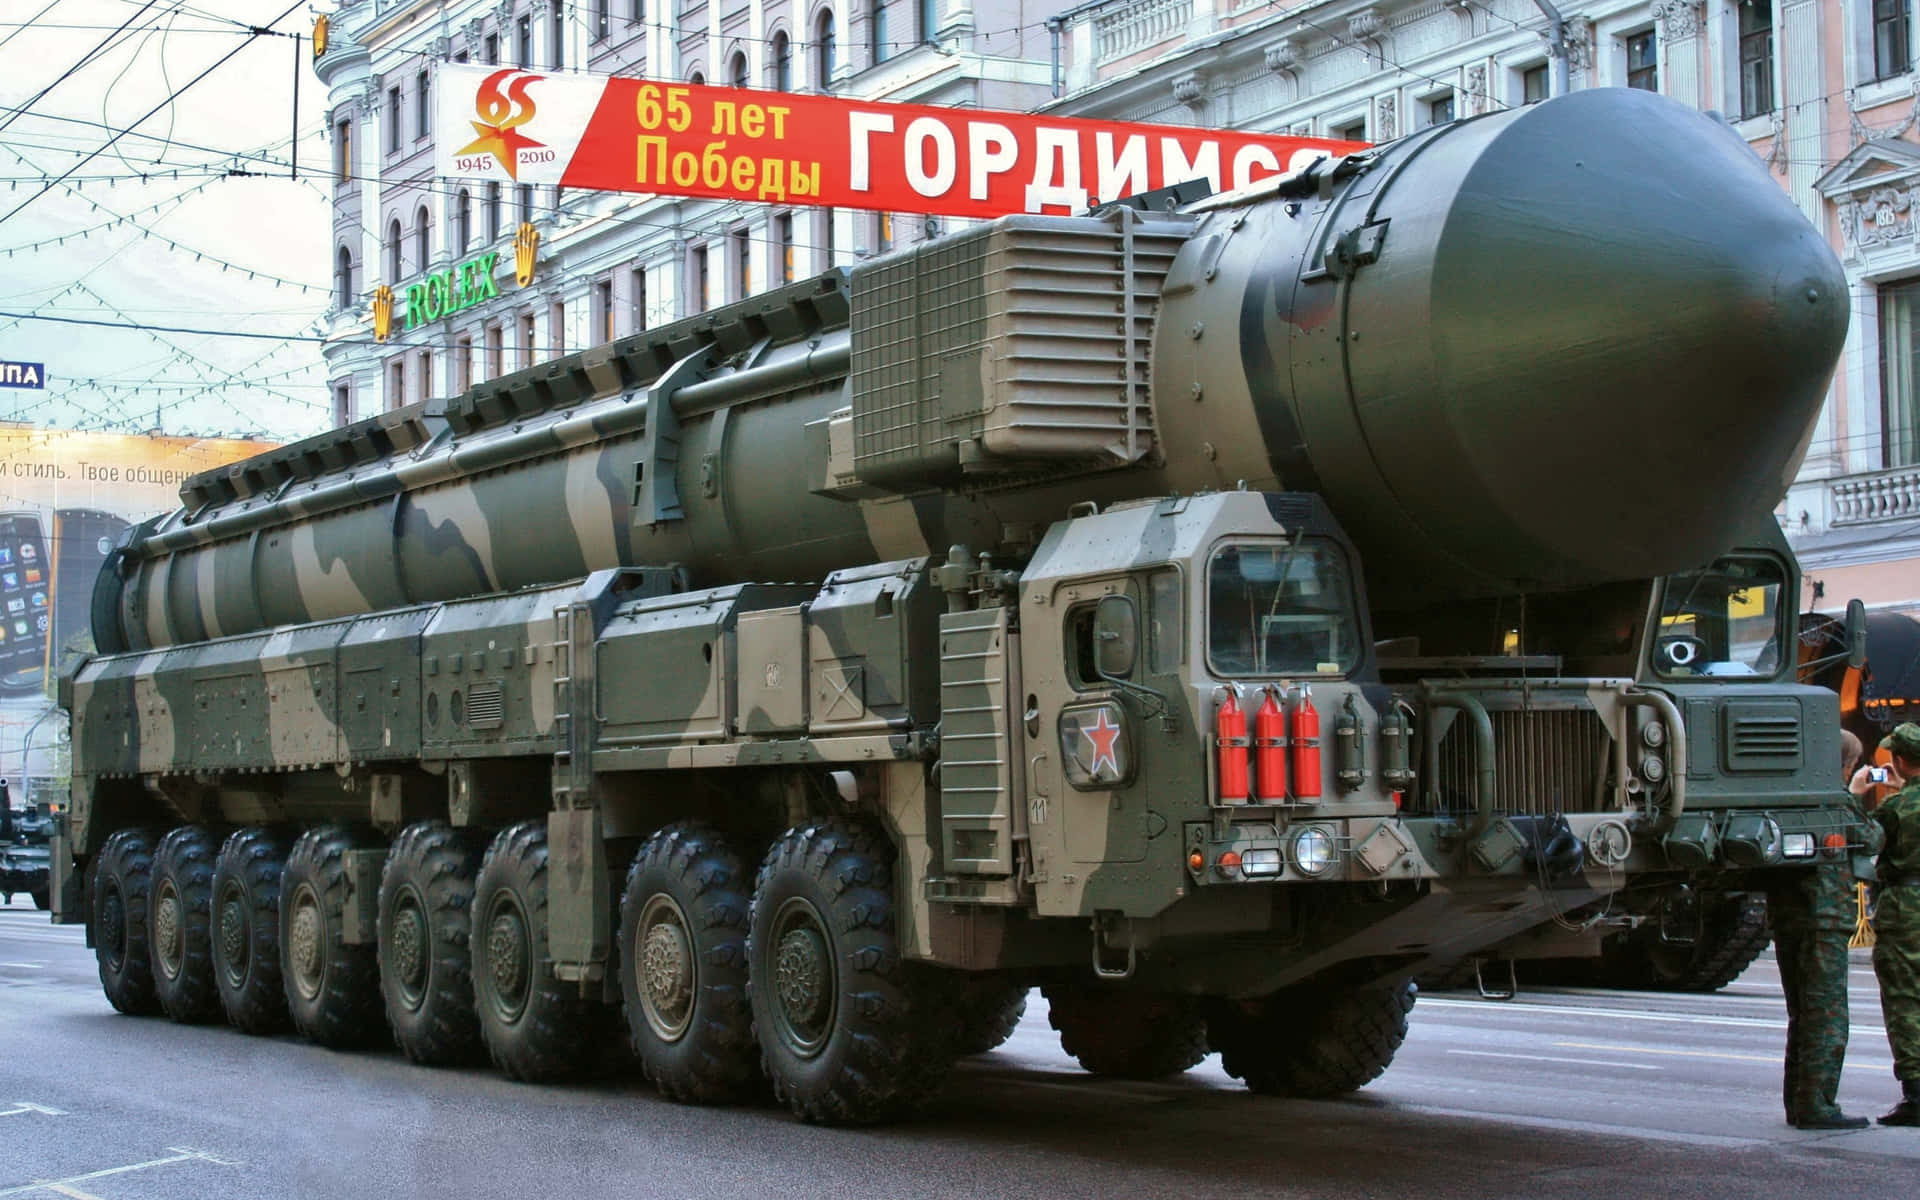 A Large Truck With A Large Missile On It